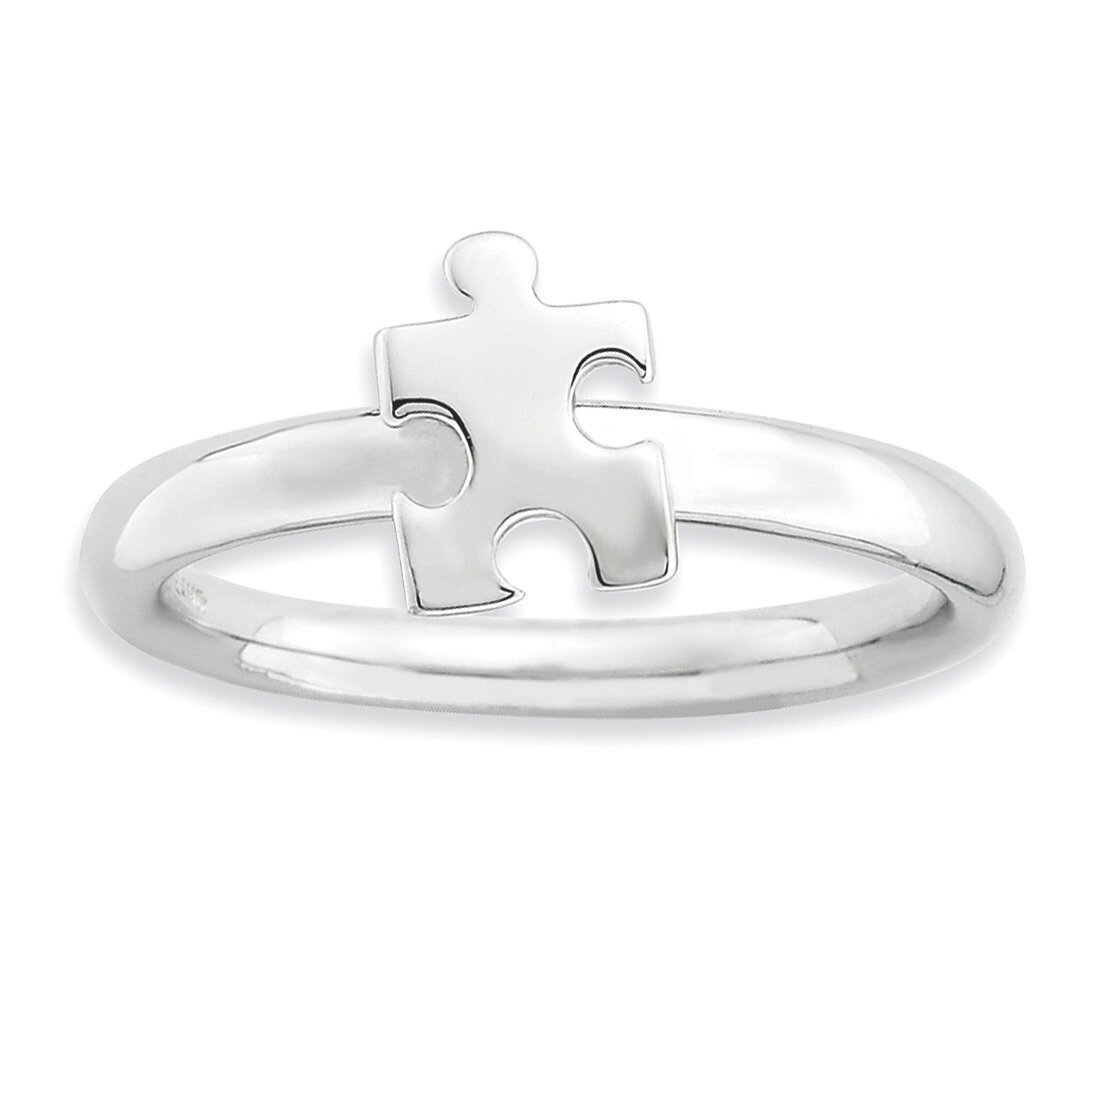 Awareness Puzzle Piece Ring - Sterling Silver Rhodium-plated QSK873